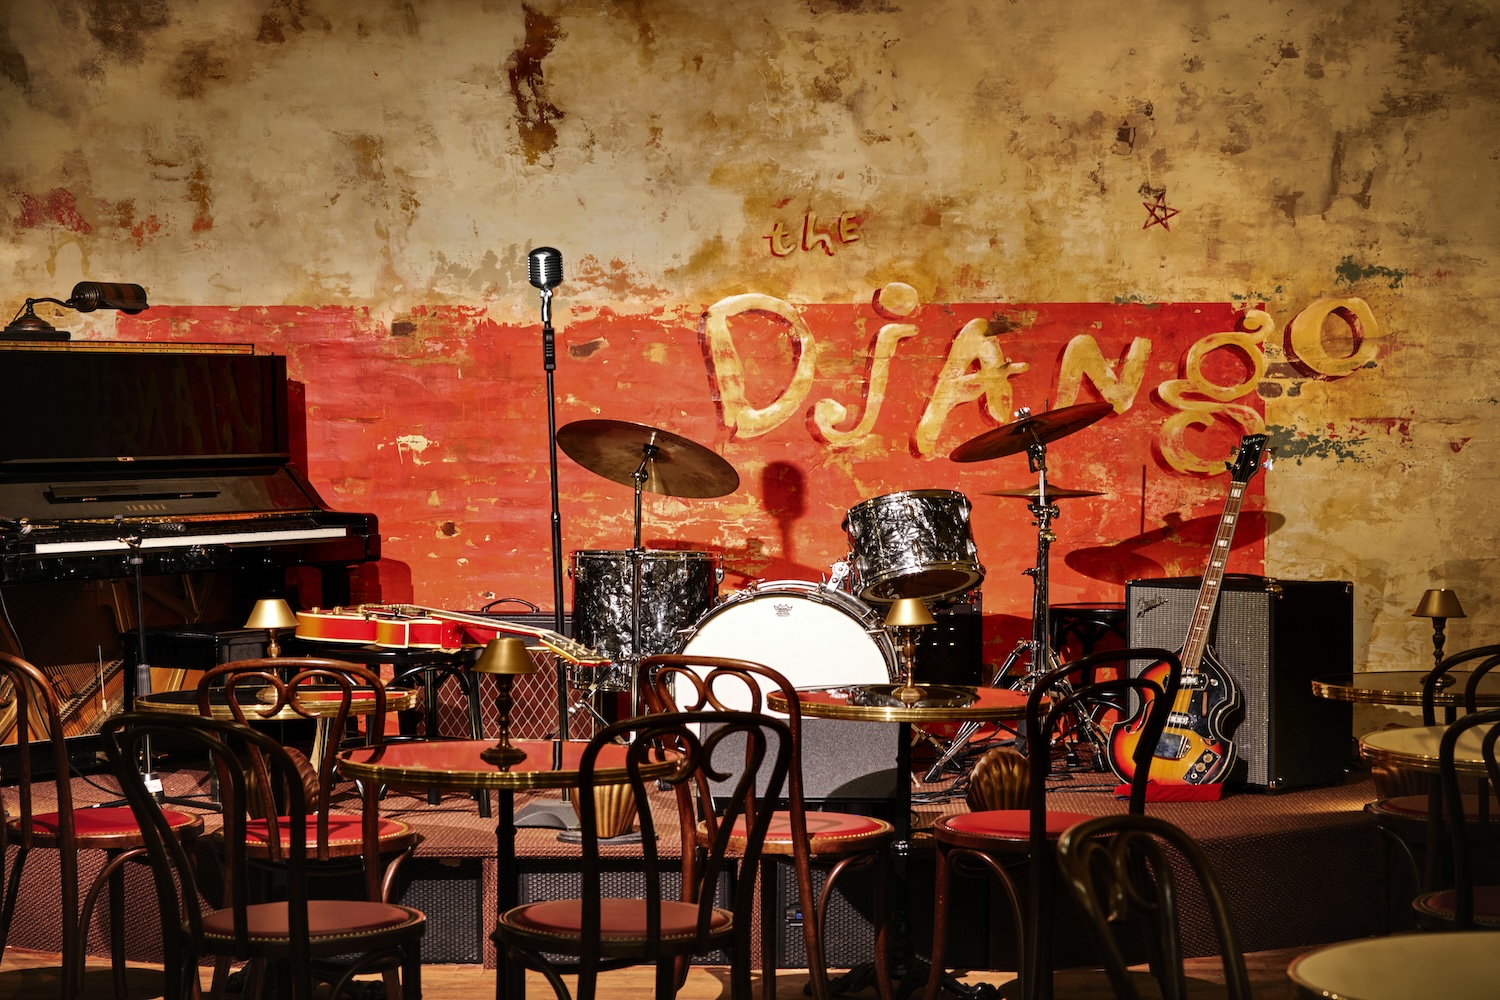 brick wall painted red with a yellow sign, drums, chairs, mic stand